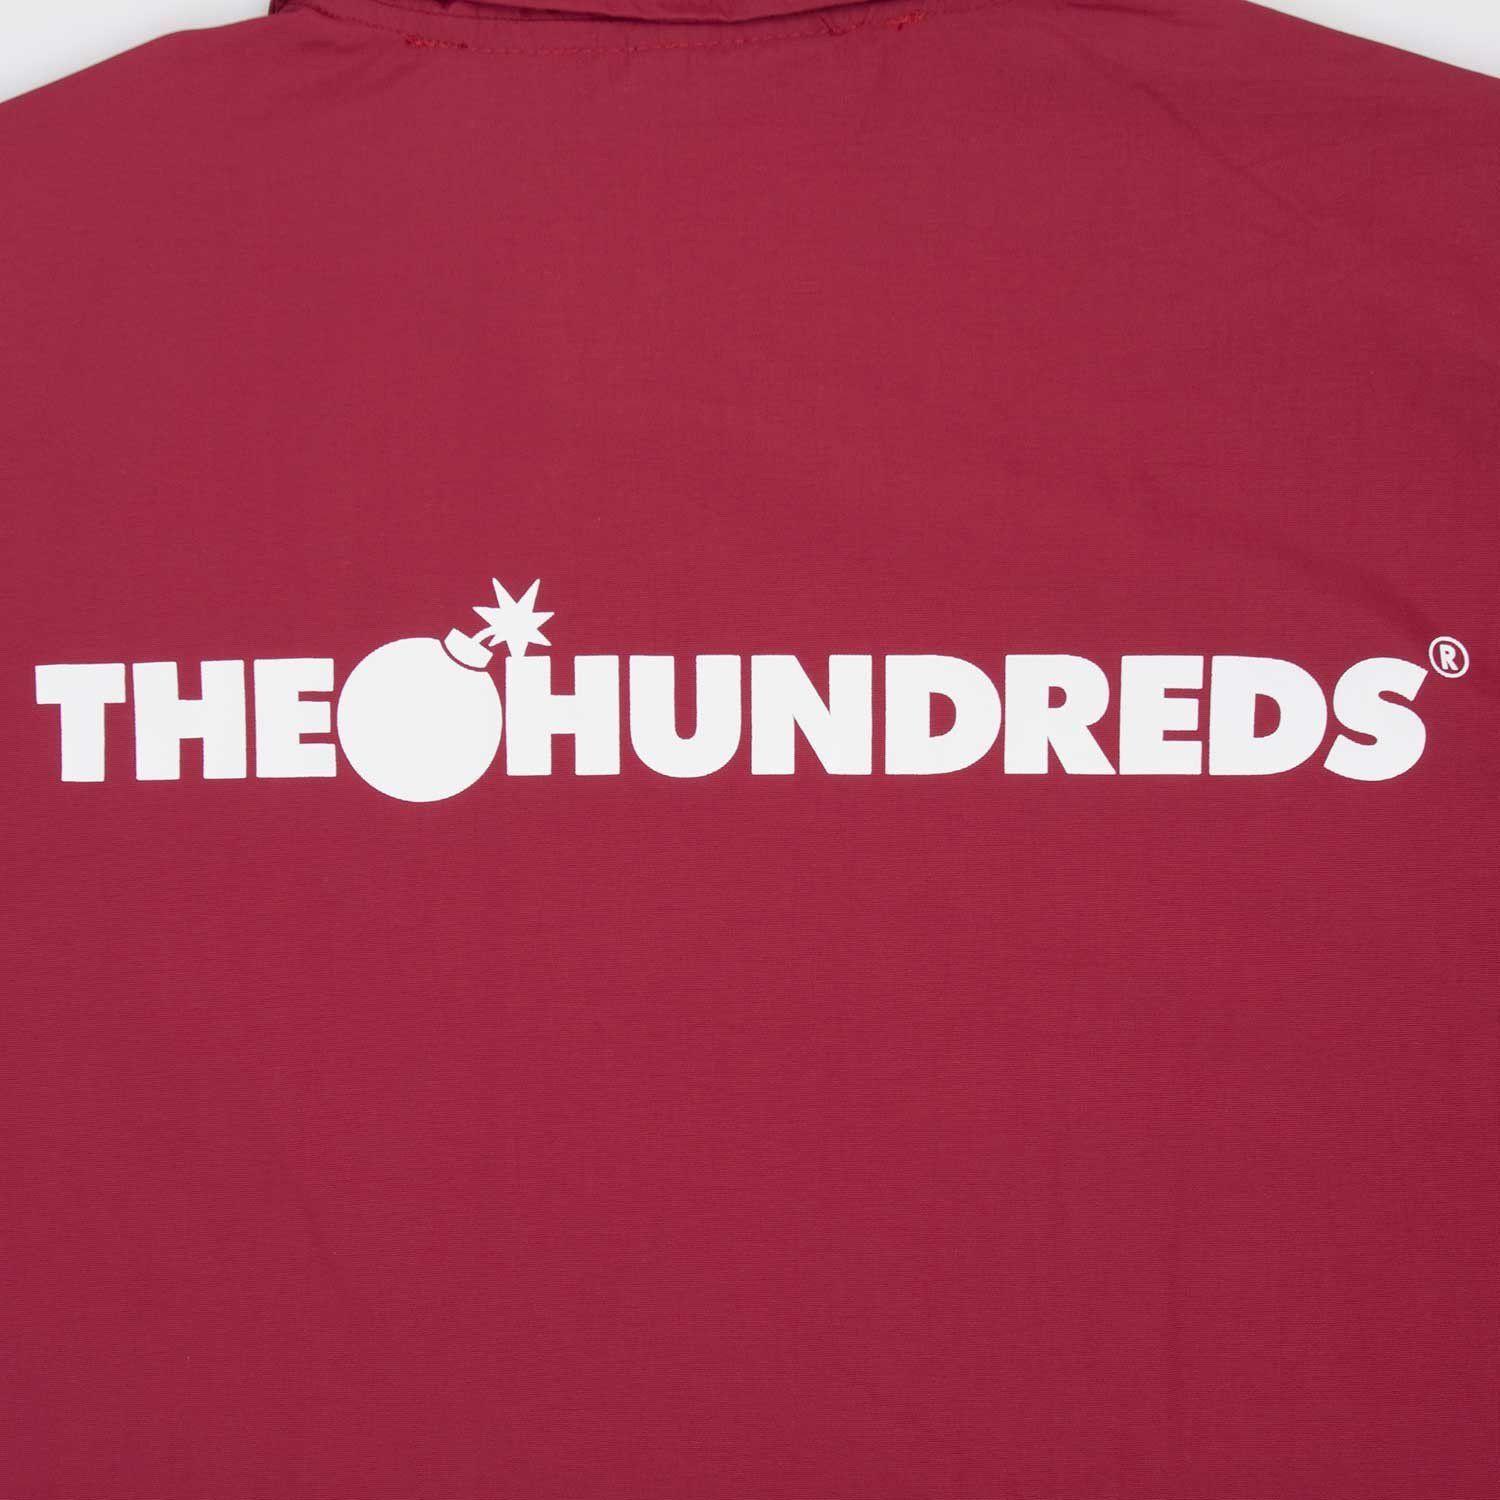 The Hundreds Clothing Logo - All Tagged 